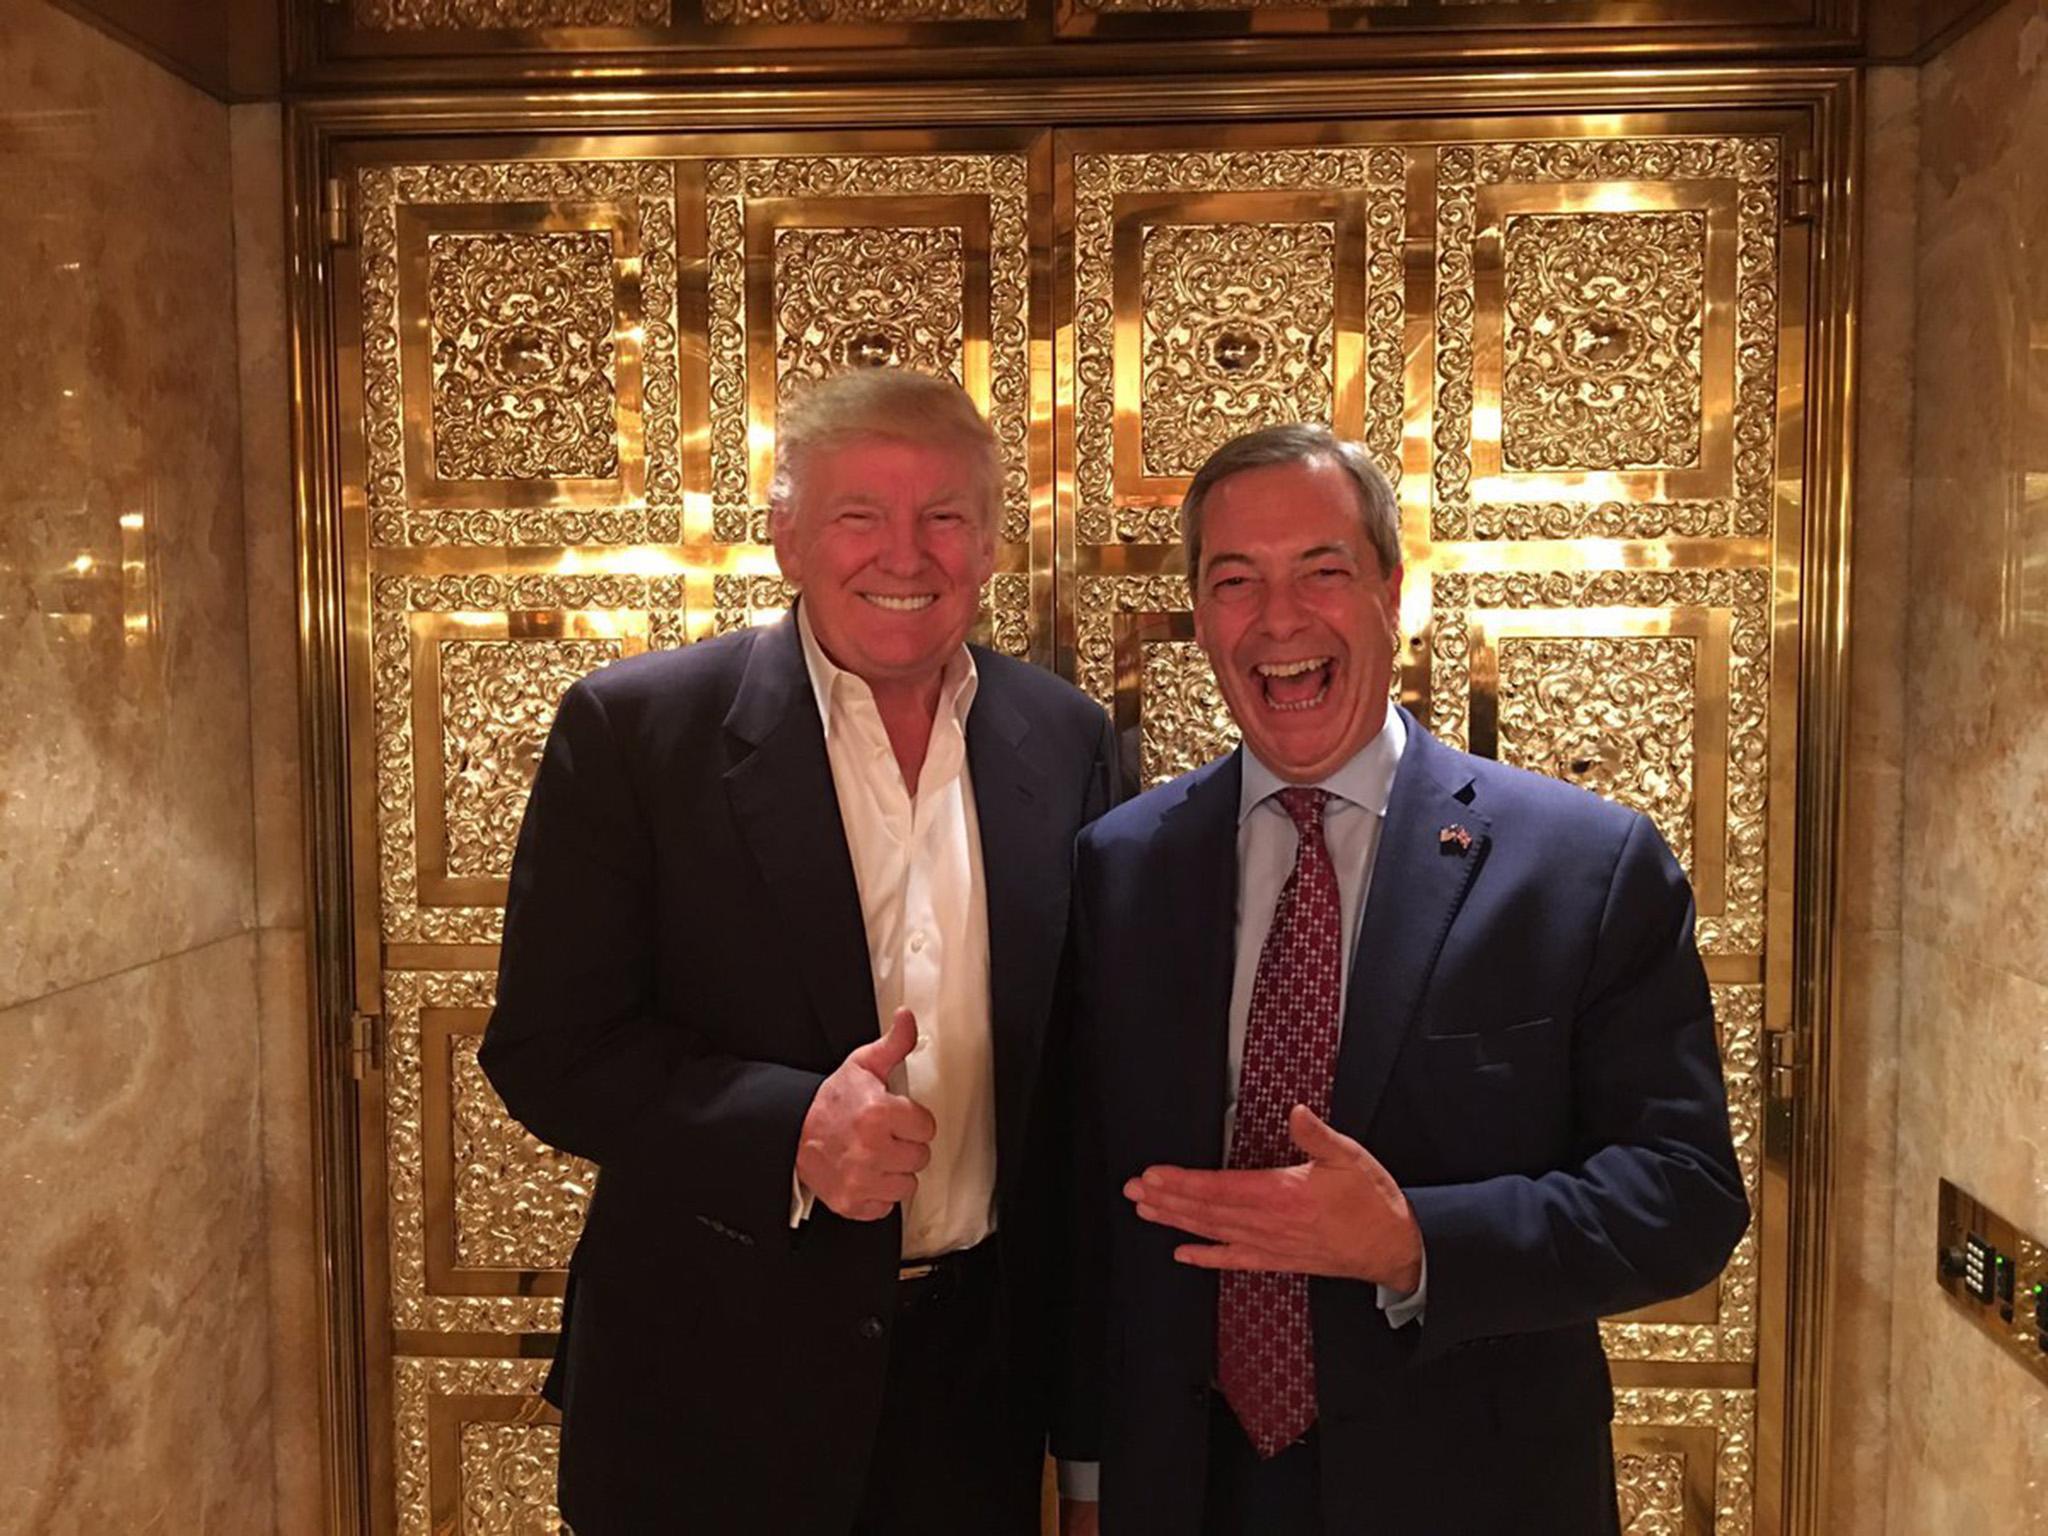 The interim Ukip leader was poppy-less when he met the President-elect at Trump Tower in New York City